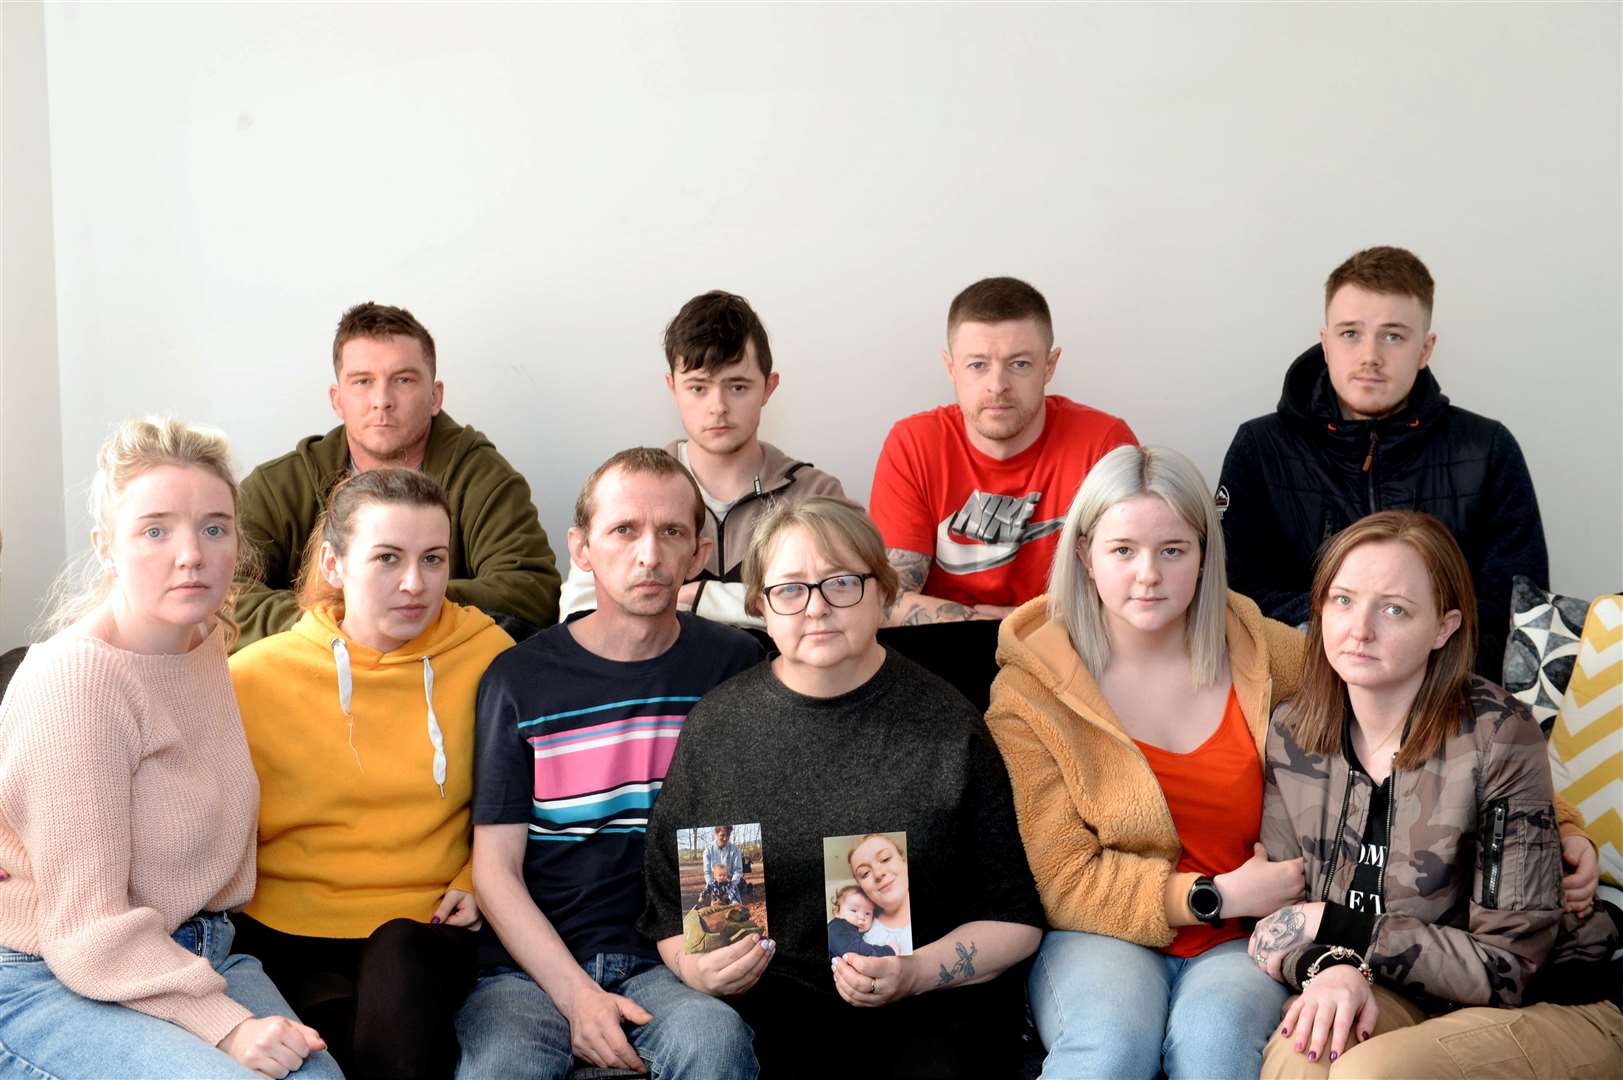 Mum Samantha Cousin (front, centre) with relatives (back row, from left) Jamie King, Jack Fyall, Michael Walsh and Sam Evans and (front row, from left) Natasha Seel, Victoria Tennant, Rob Tennant, Vikki Fyall and Jamie Lee King.